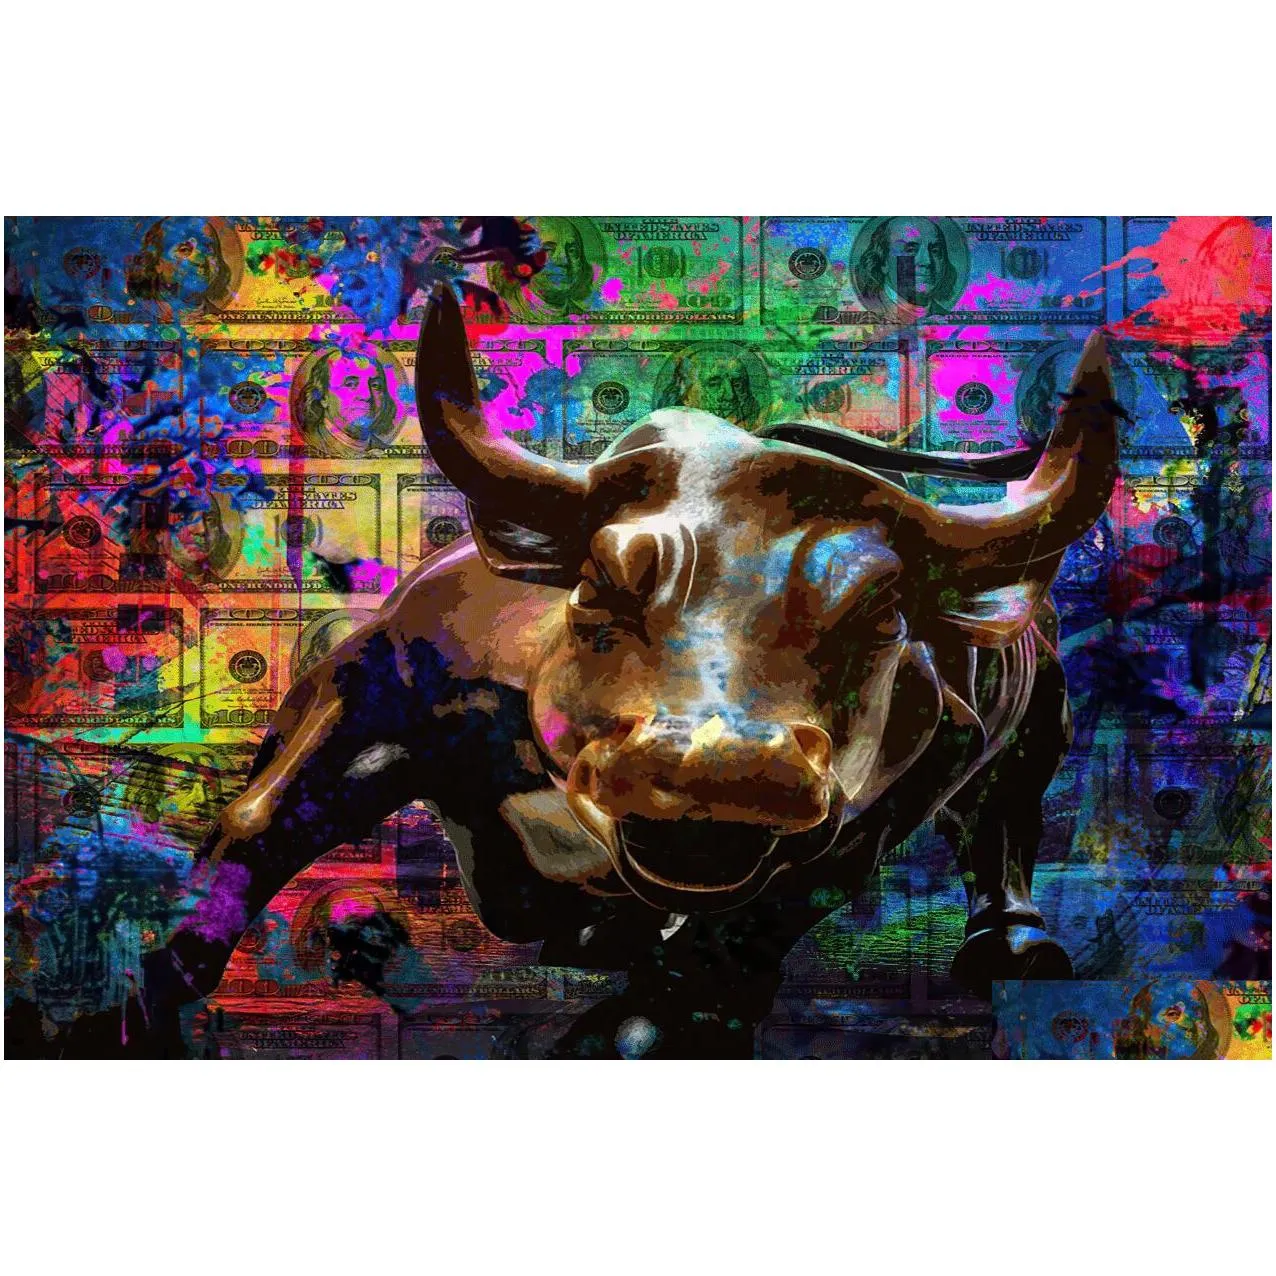 graffiti bull dollar keyboard print colorful canvas painting print posters sports car luxury wall art picture home decor cuadros